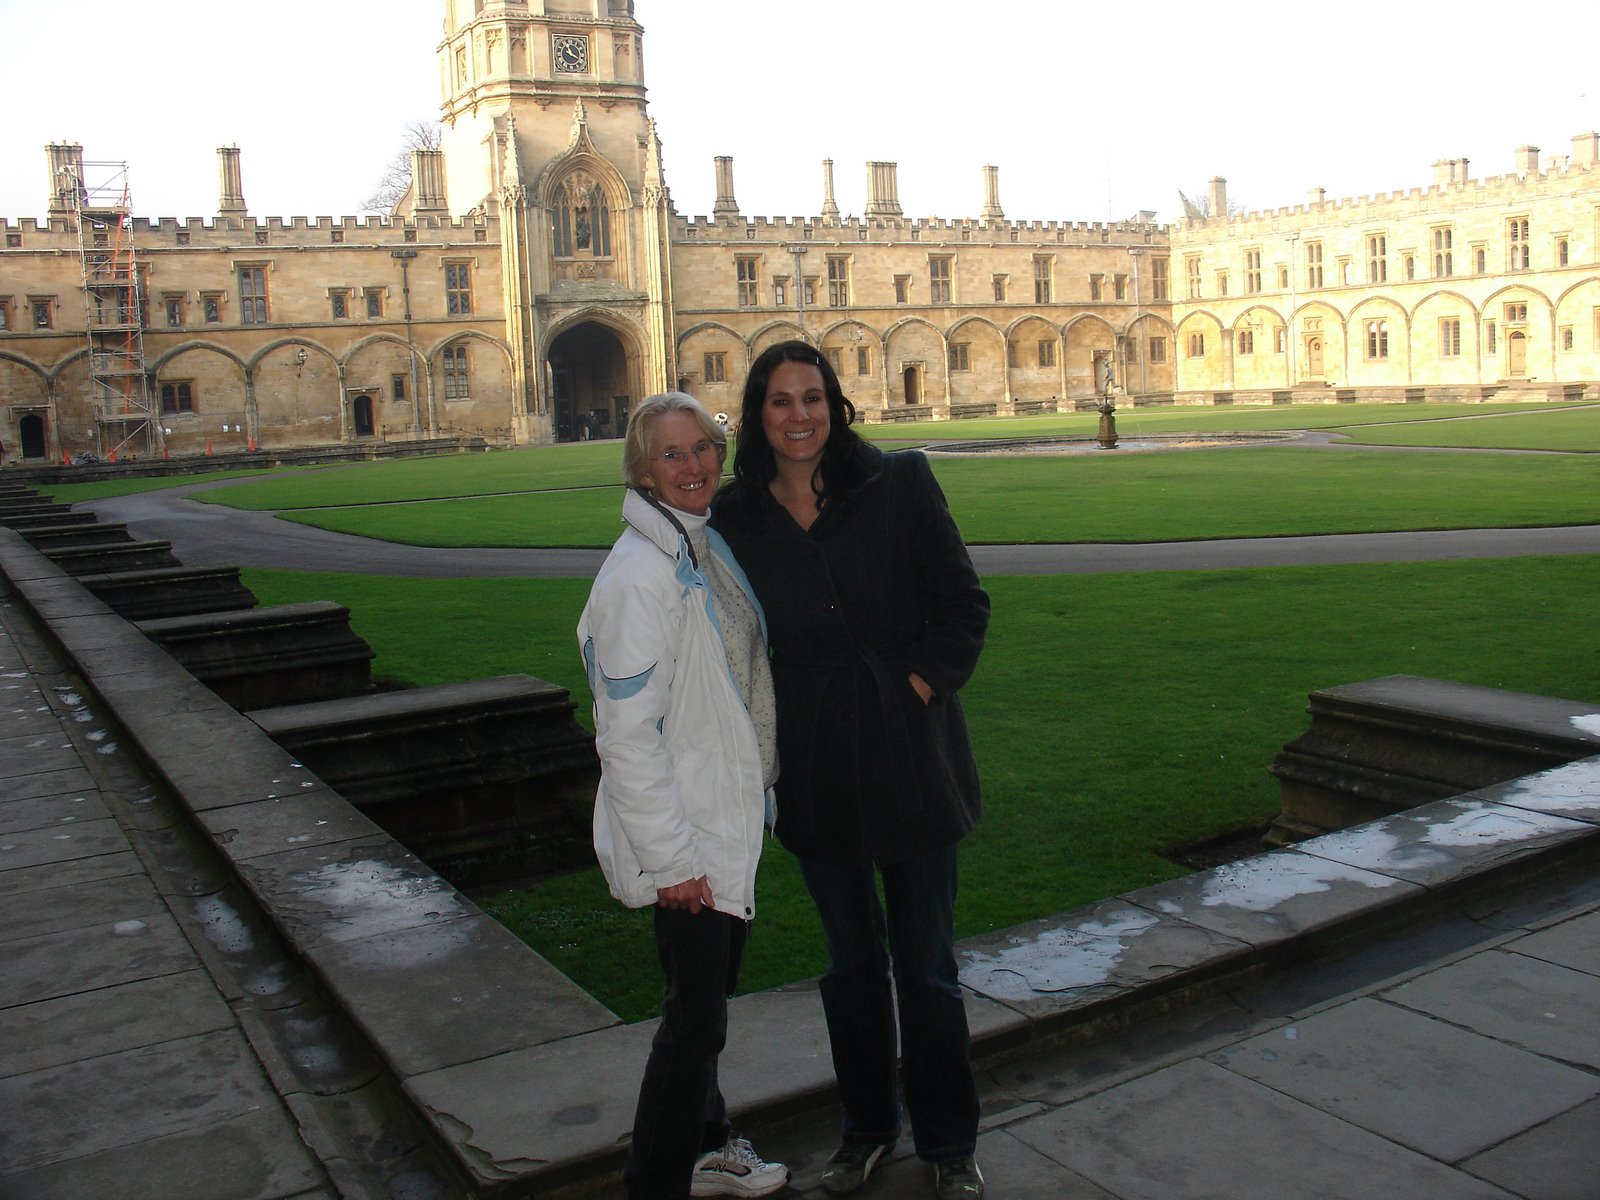 [Mom+and+Colleen+at+Christchurch+College,+Oxford.JPG]